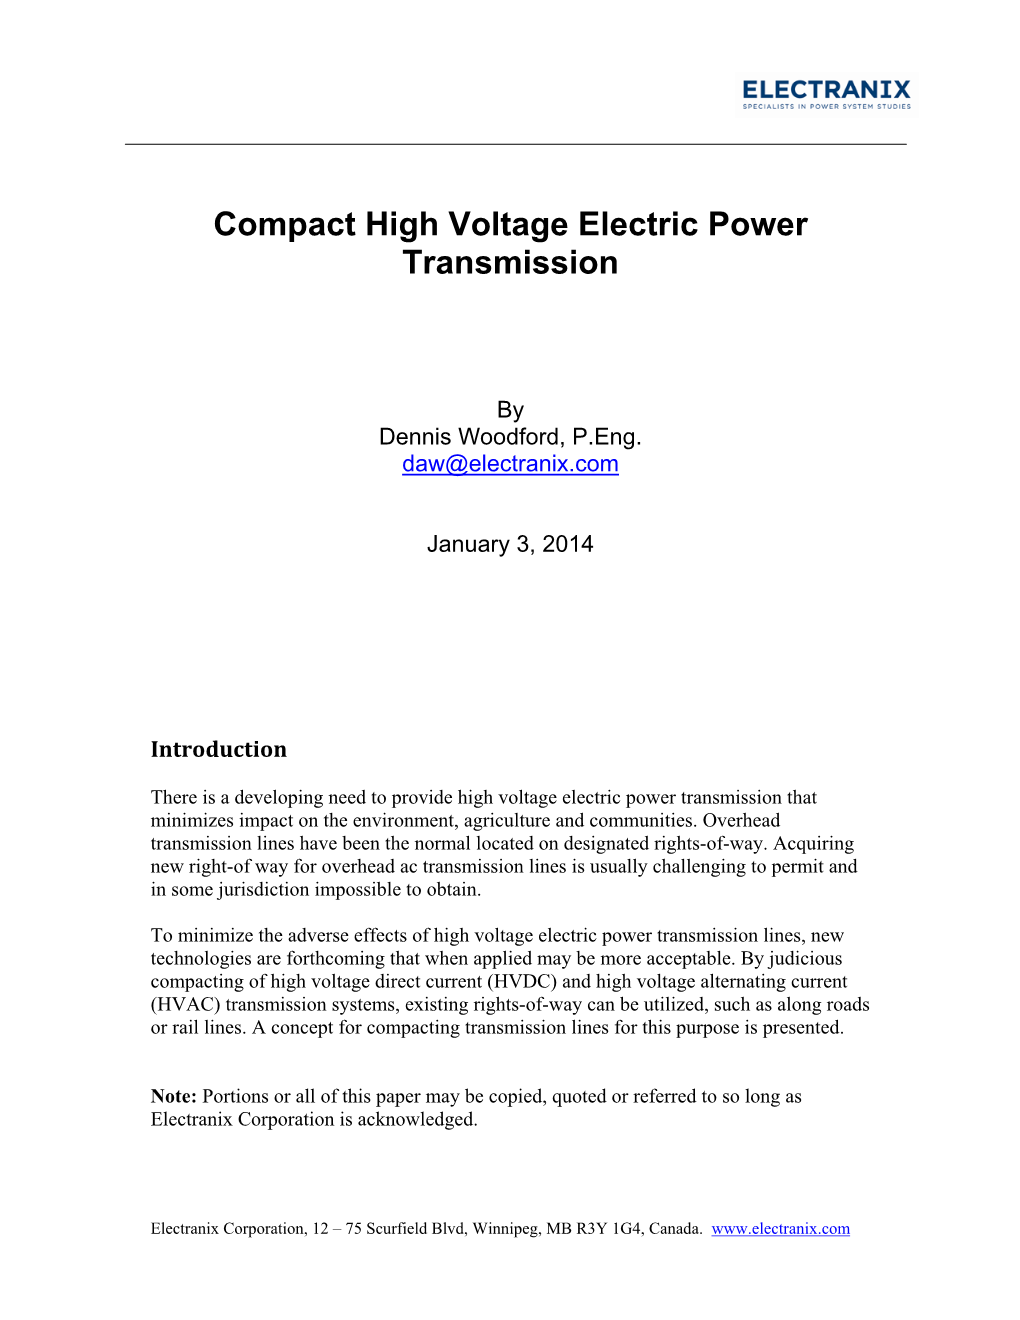 Compact High Voltage Electric Power Transmission